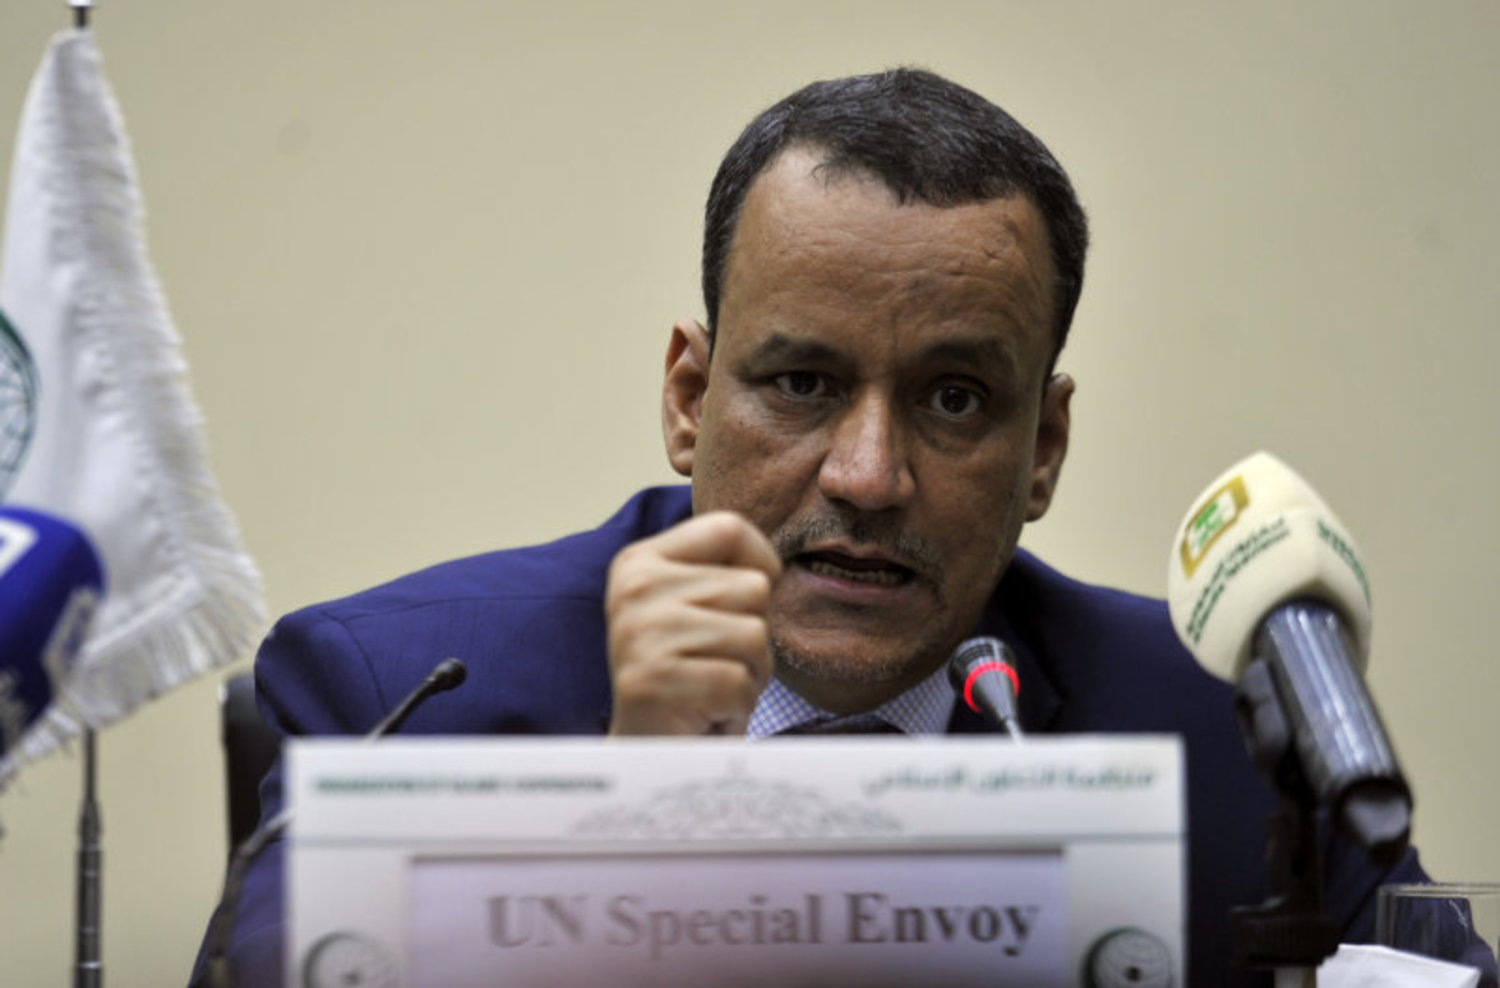 United Nations Special Envoy for Yemen Ismail Ould Cheikh Ahmed speaks during a press conference with the secretary general of the Organization of Islamic Cooperation (OIC) in Jeddah on August 8, 2016. / AFP PHOTO